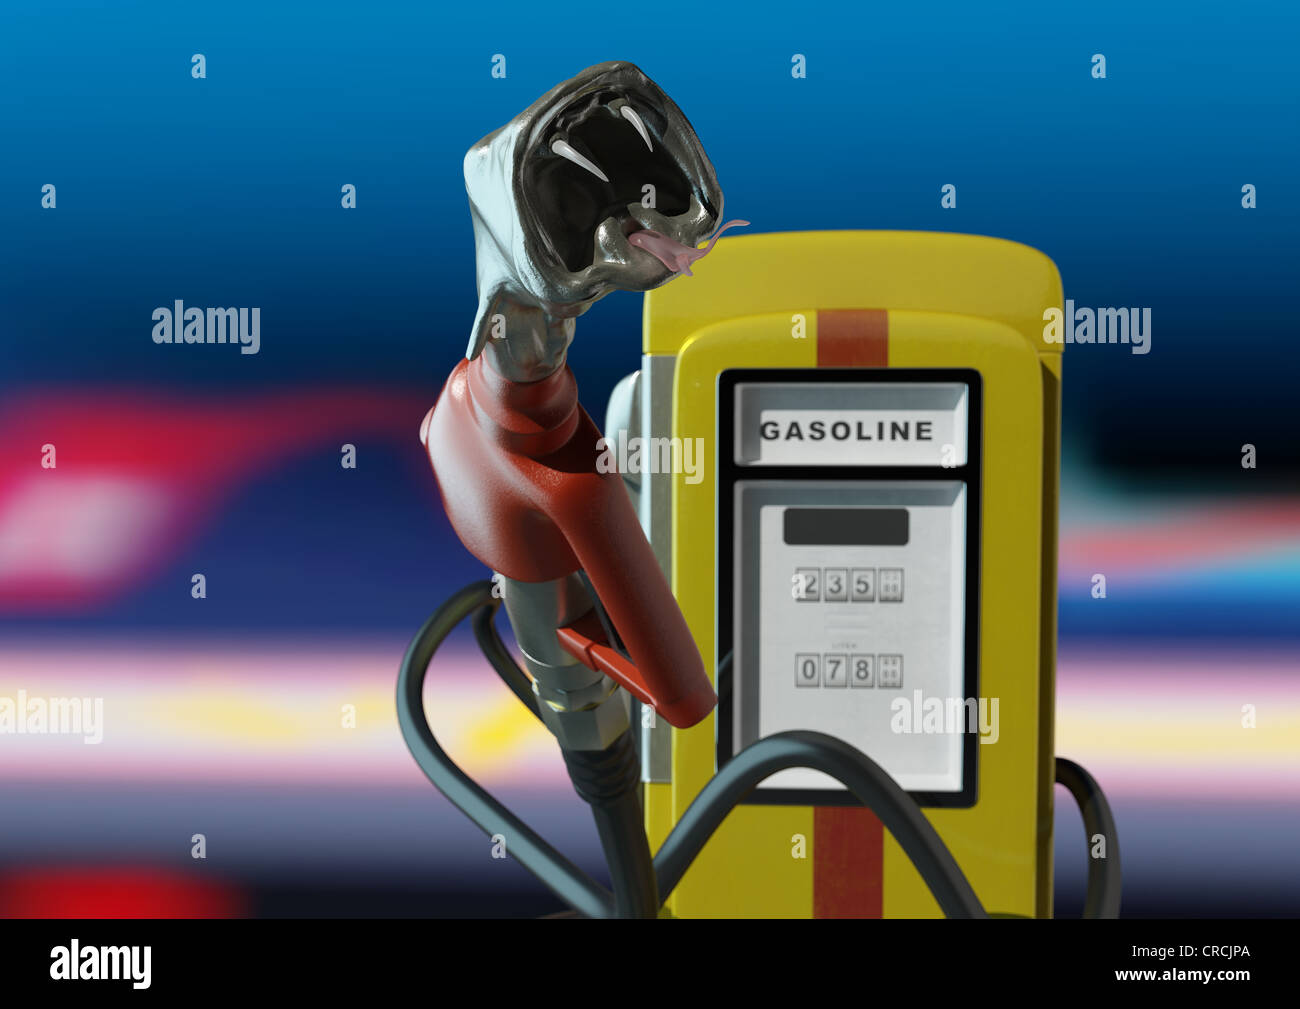 Petrol pump labelled with Gasoline, with the nozzle in the form of a serpent's head, symbolic image Stock Photo